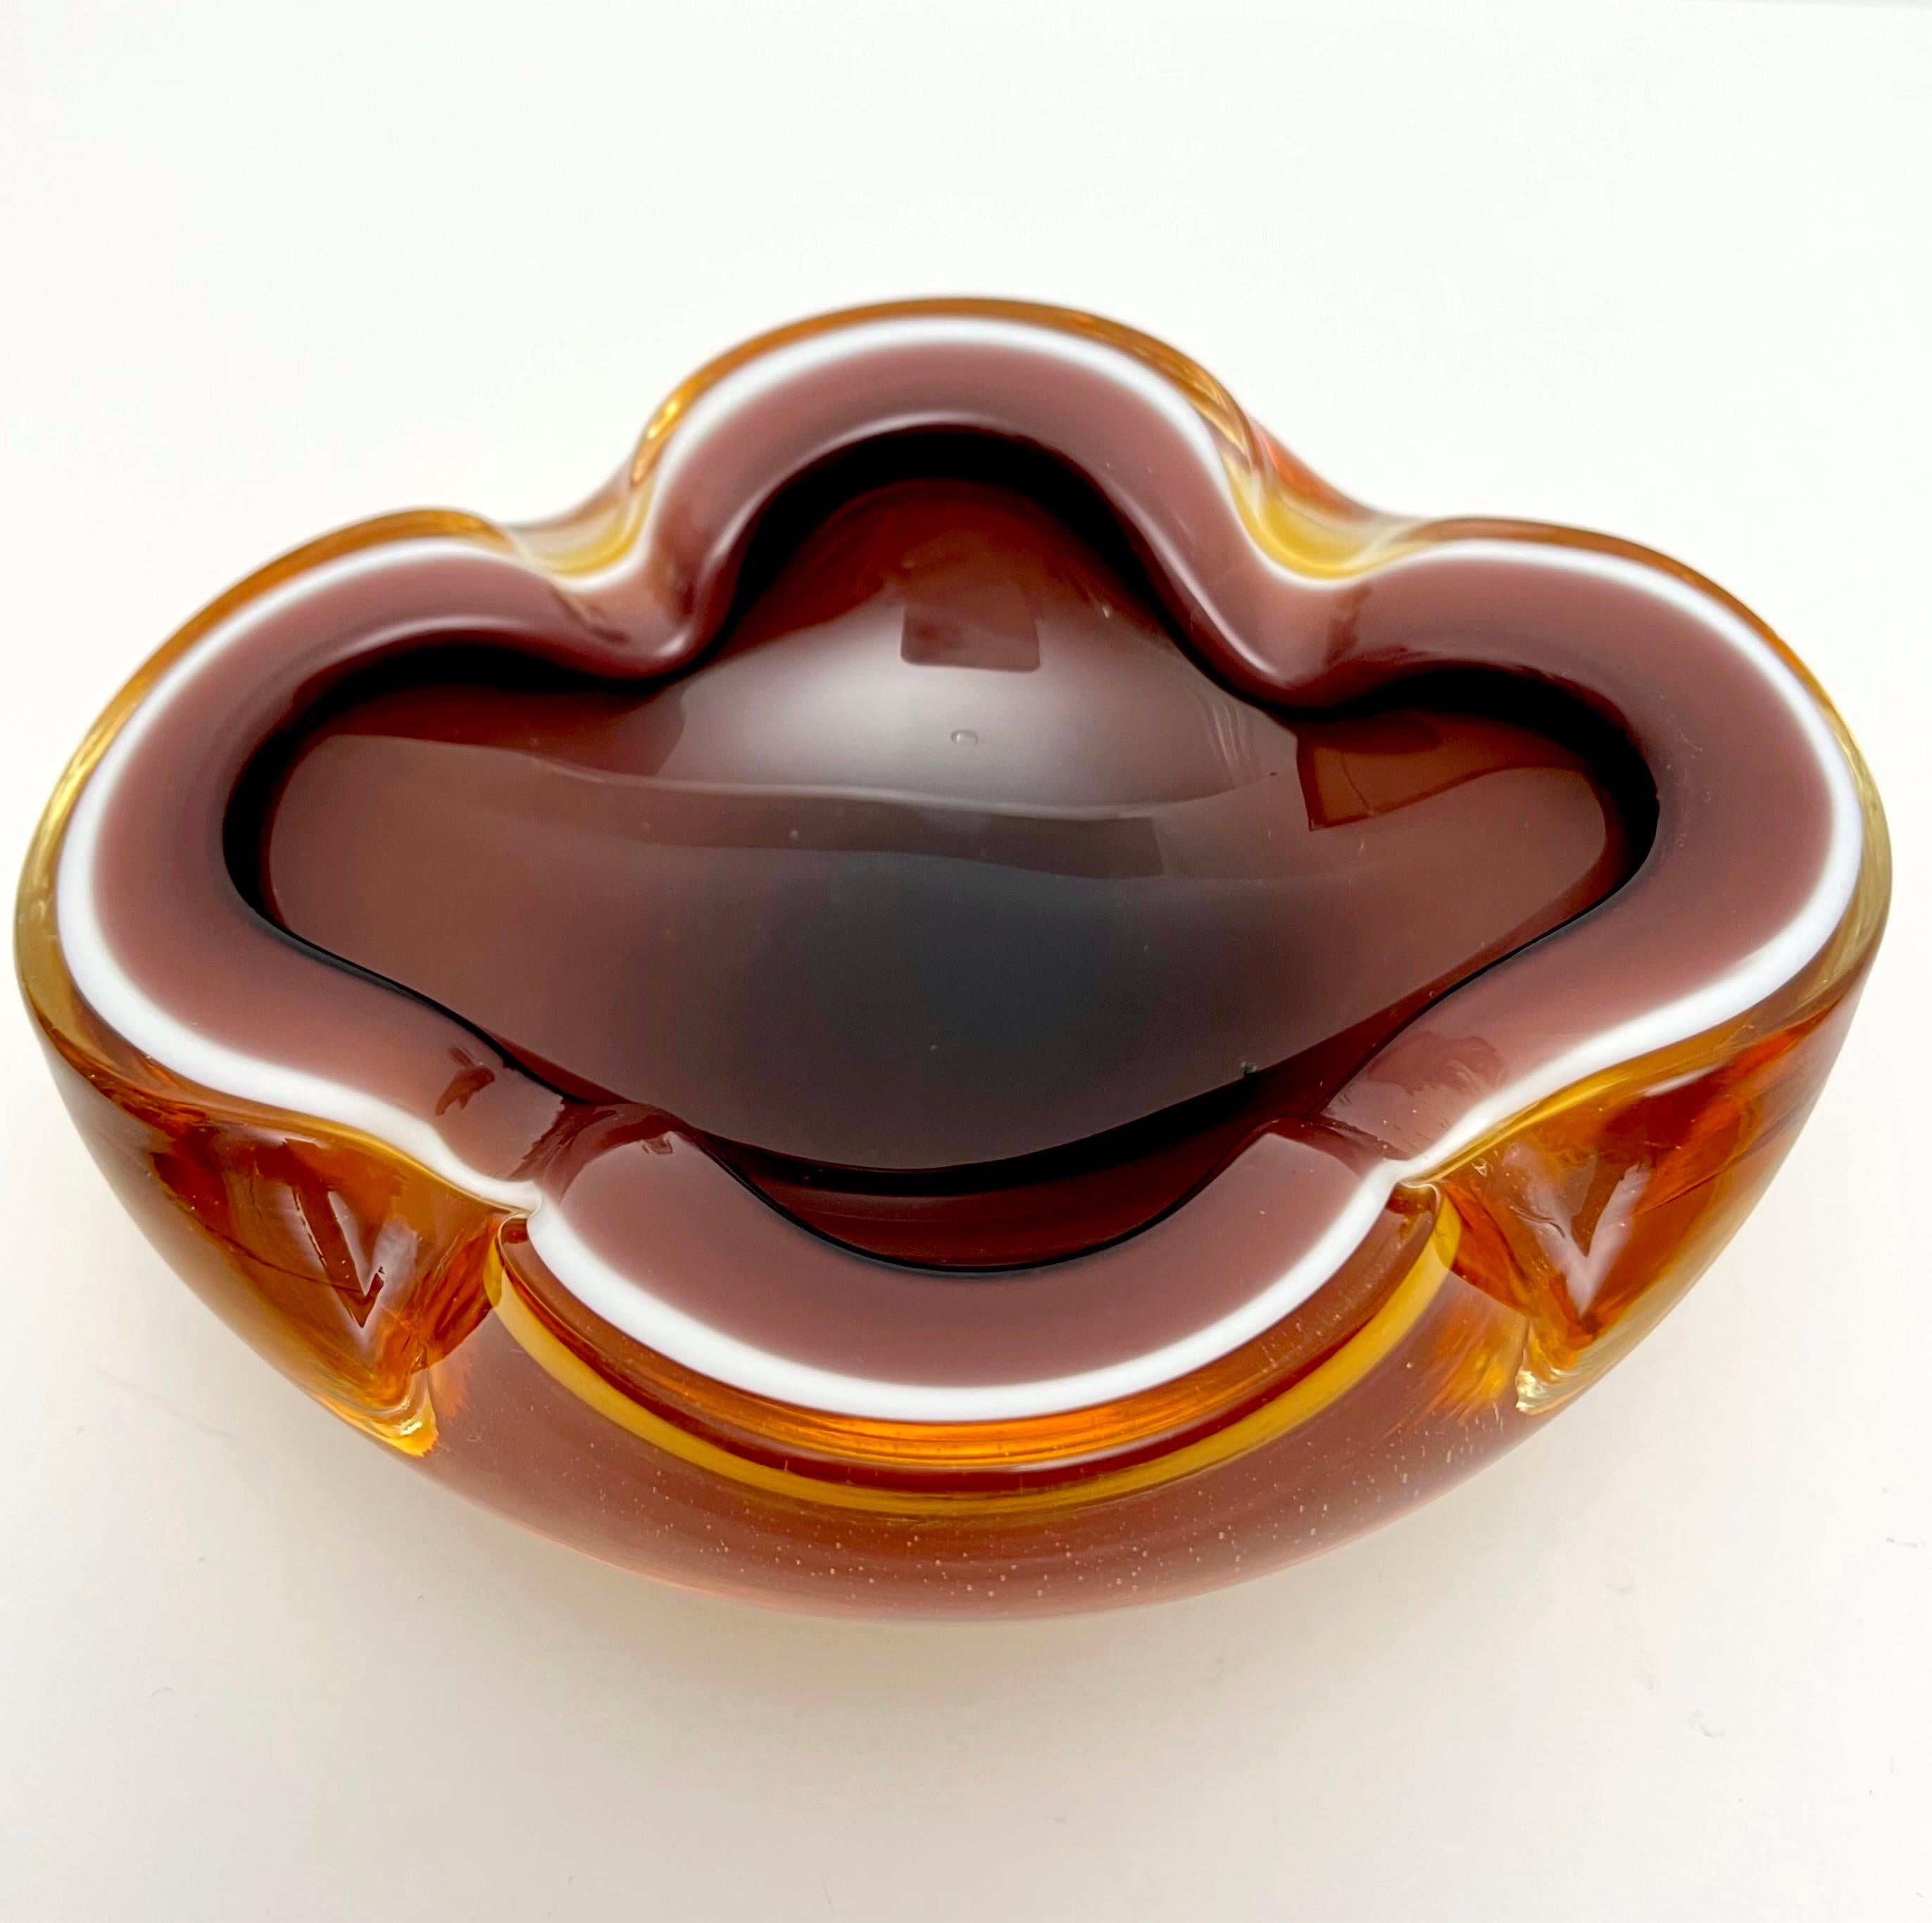 Stunning Geode cased murano bowl, vide poche or cigar ash tray with pinched sides. The three layers of color make this much more unique and rare. Gold on the outside with a thin line of white glass while the inside a warm taupe color giving it the